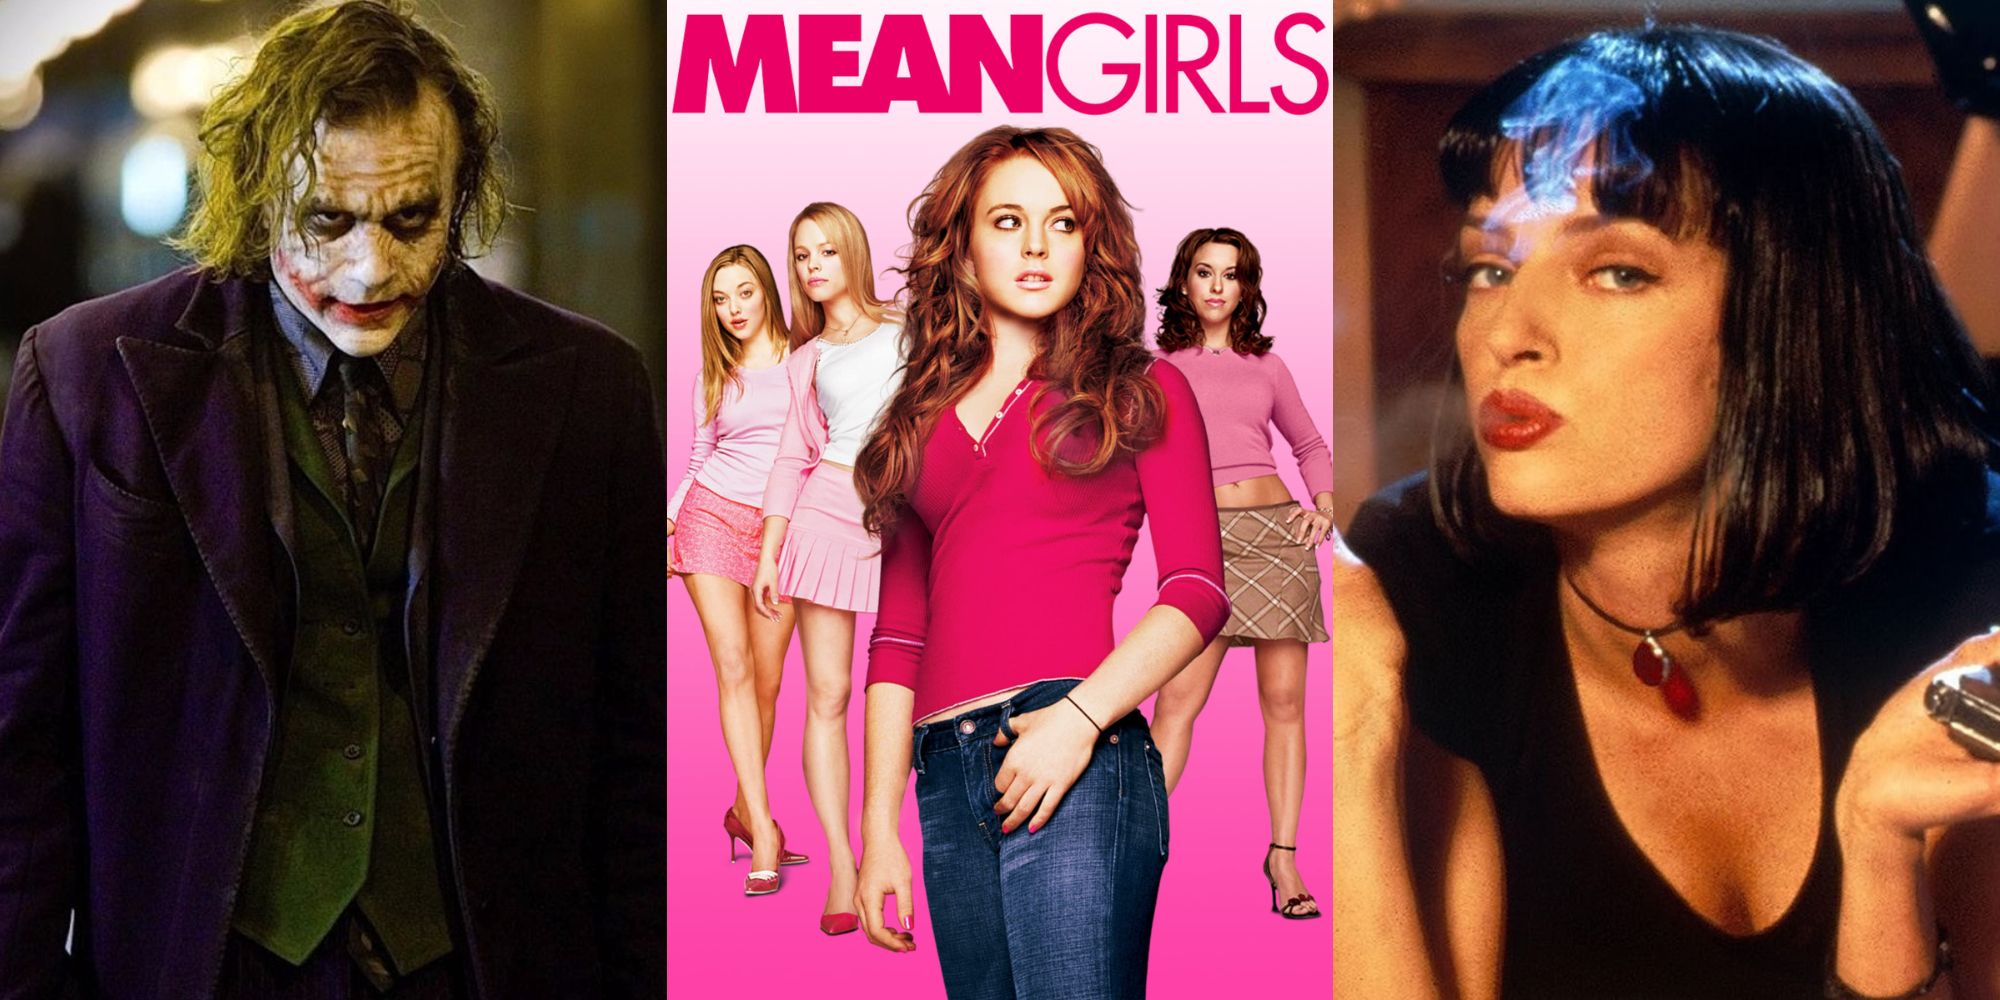 Stills from The Dark Knight, Mean Girls, and Pulp Fiction